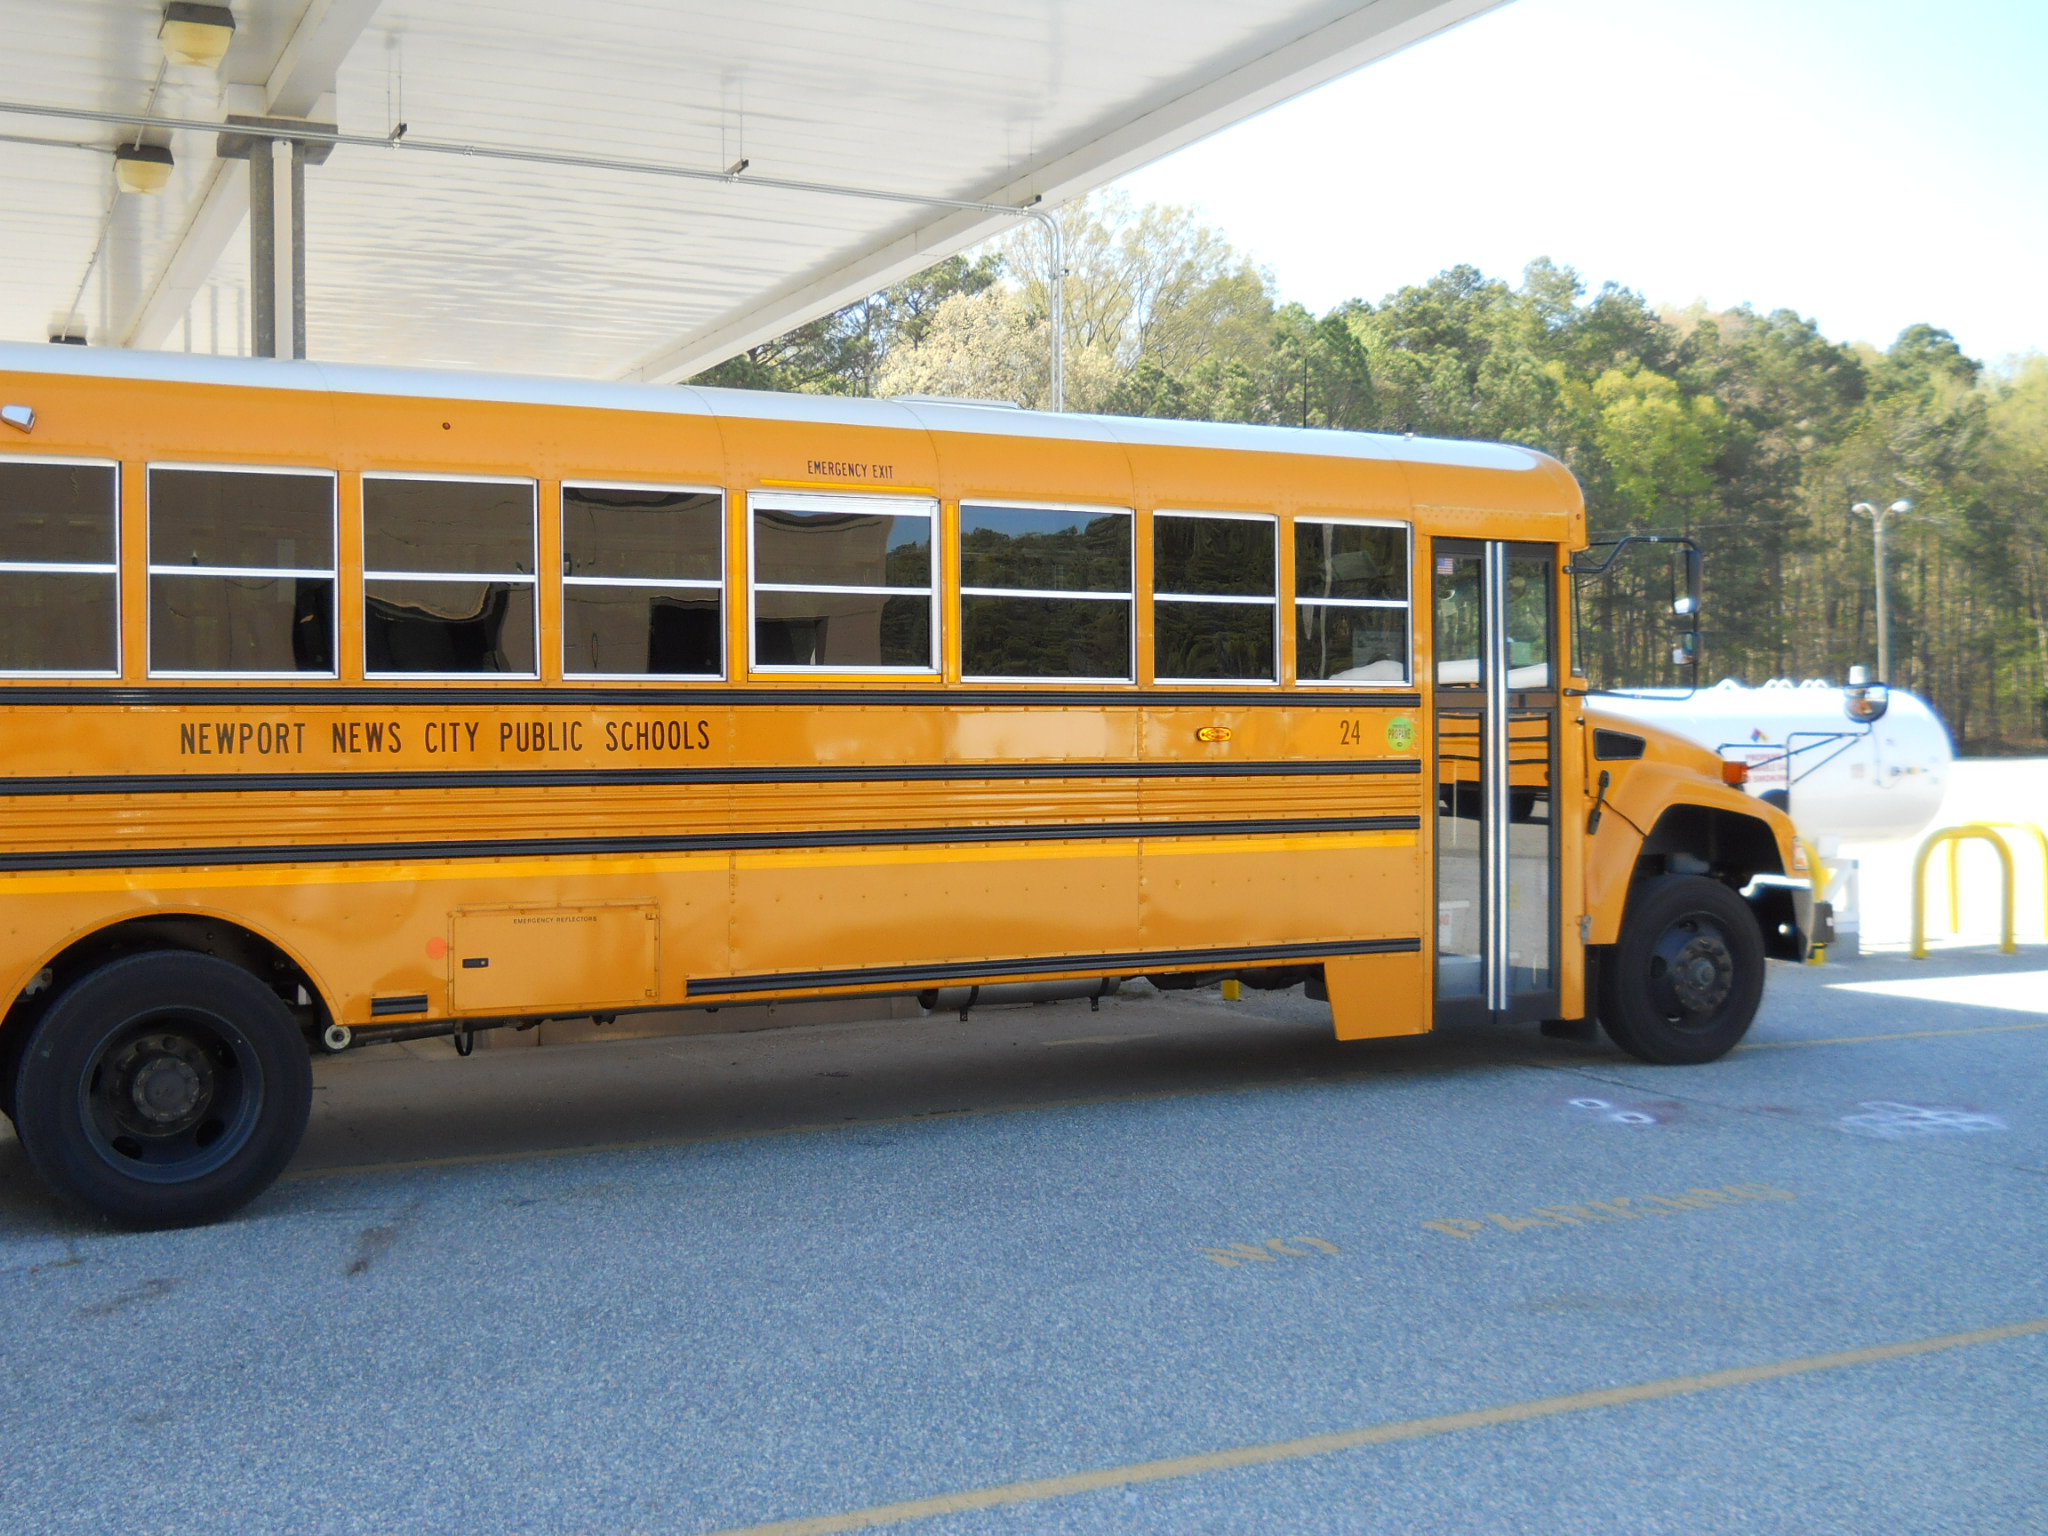 The purchase of 24 Blue Bird Vision Propane school buses supports NNPS's focus on environmentally friendly and practical actions that reduce carbon emissions and ensure energy efficiency.